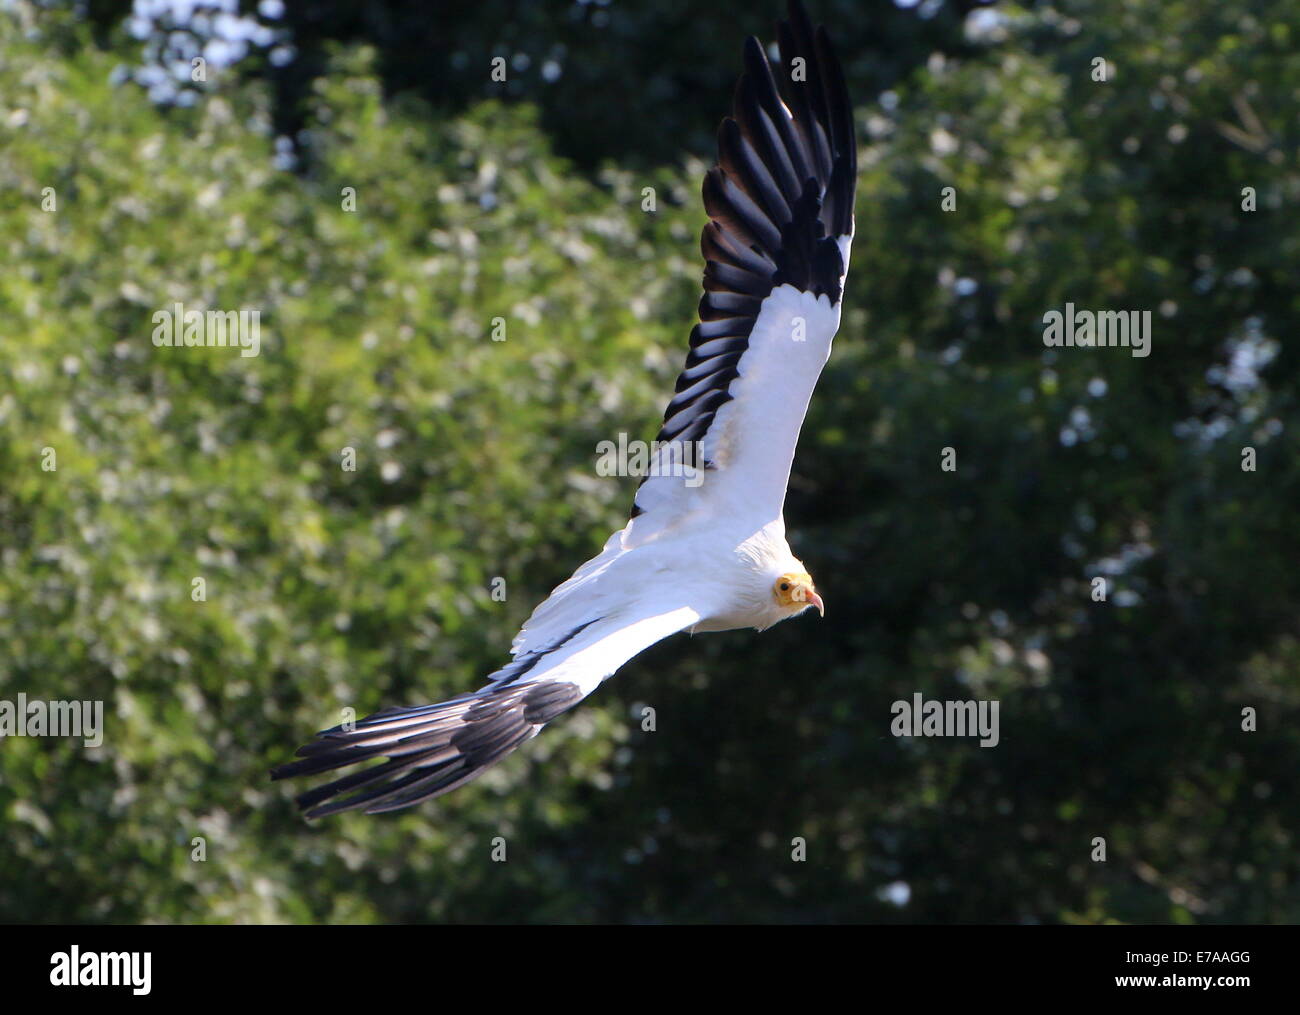 Egyptian vulture or white scavenger vulture (Neophron percnopterus) in flight Stock Photo